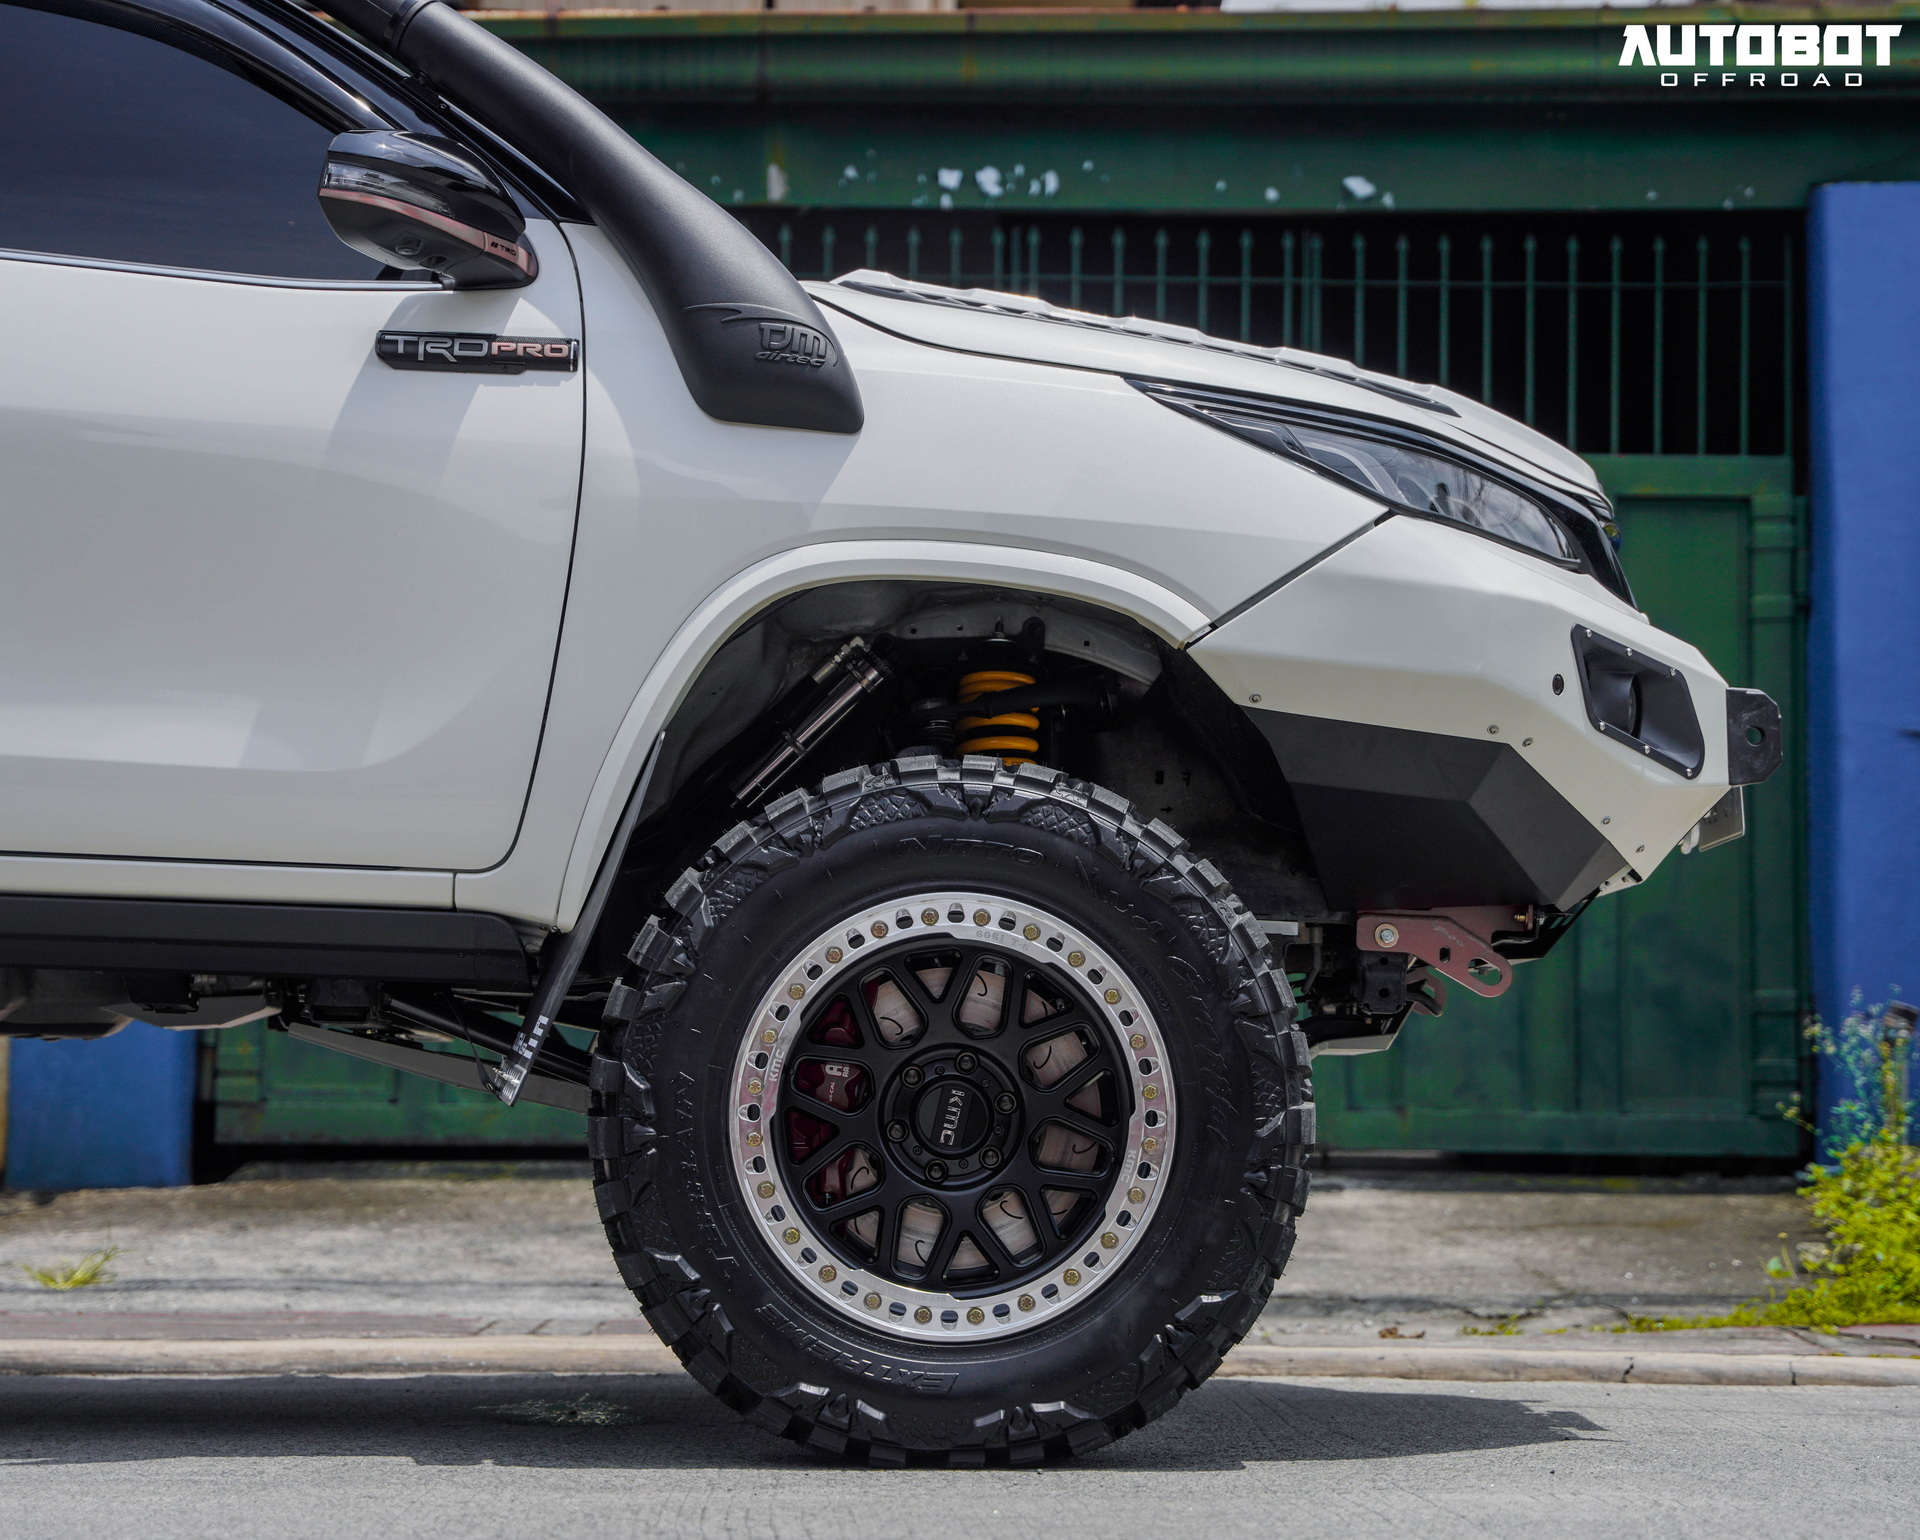 Toyota Fortuner Modified By Autobot 38 - Auto Recent